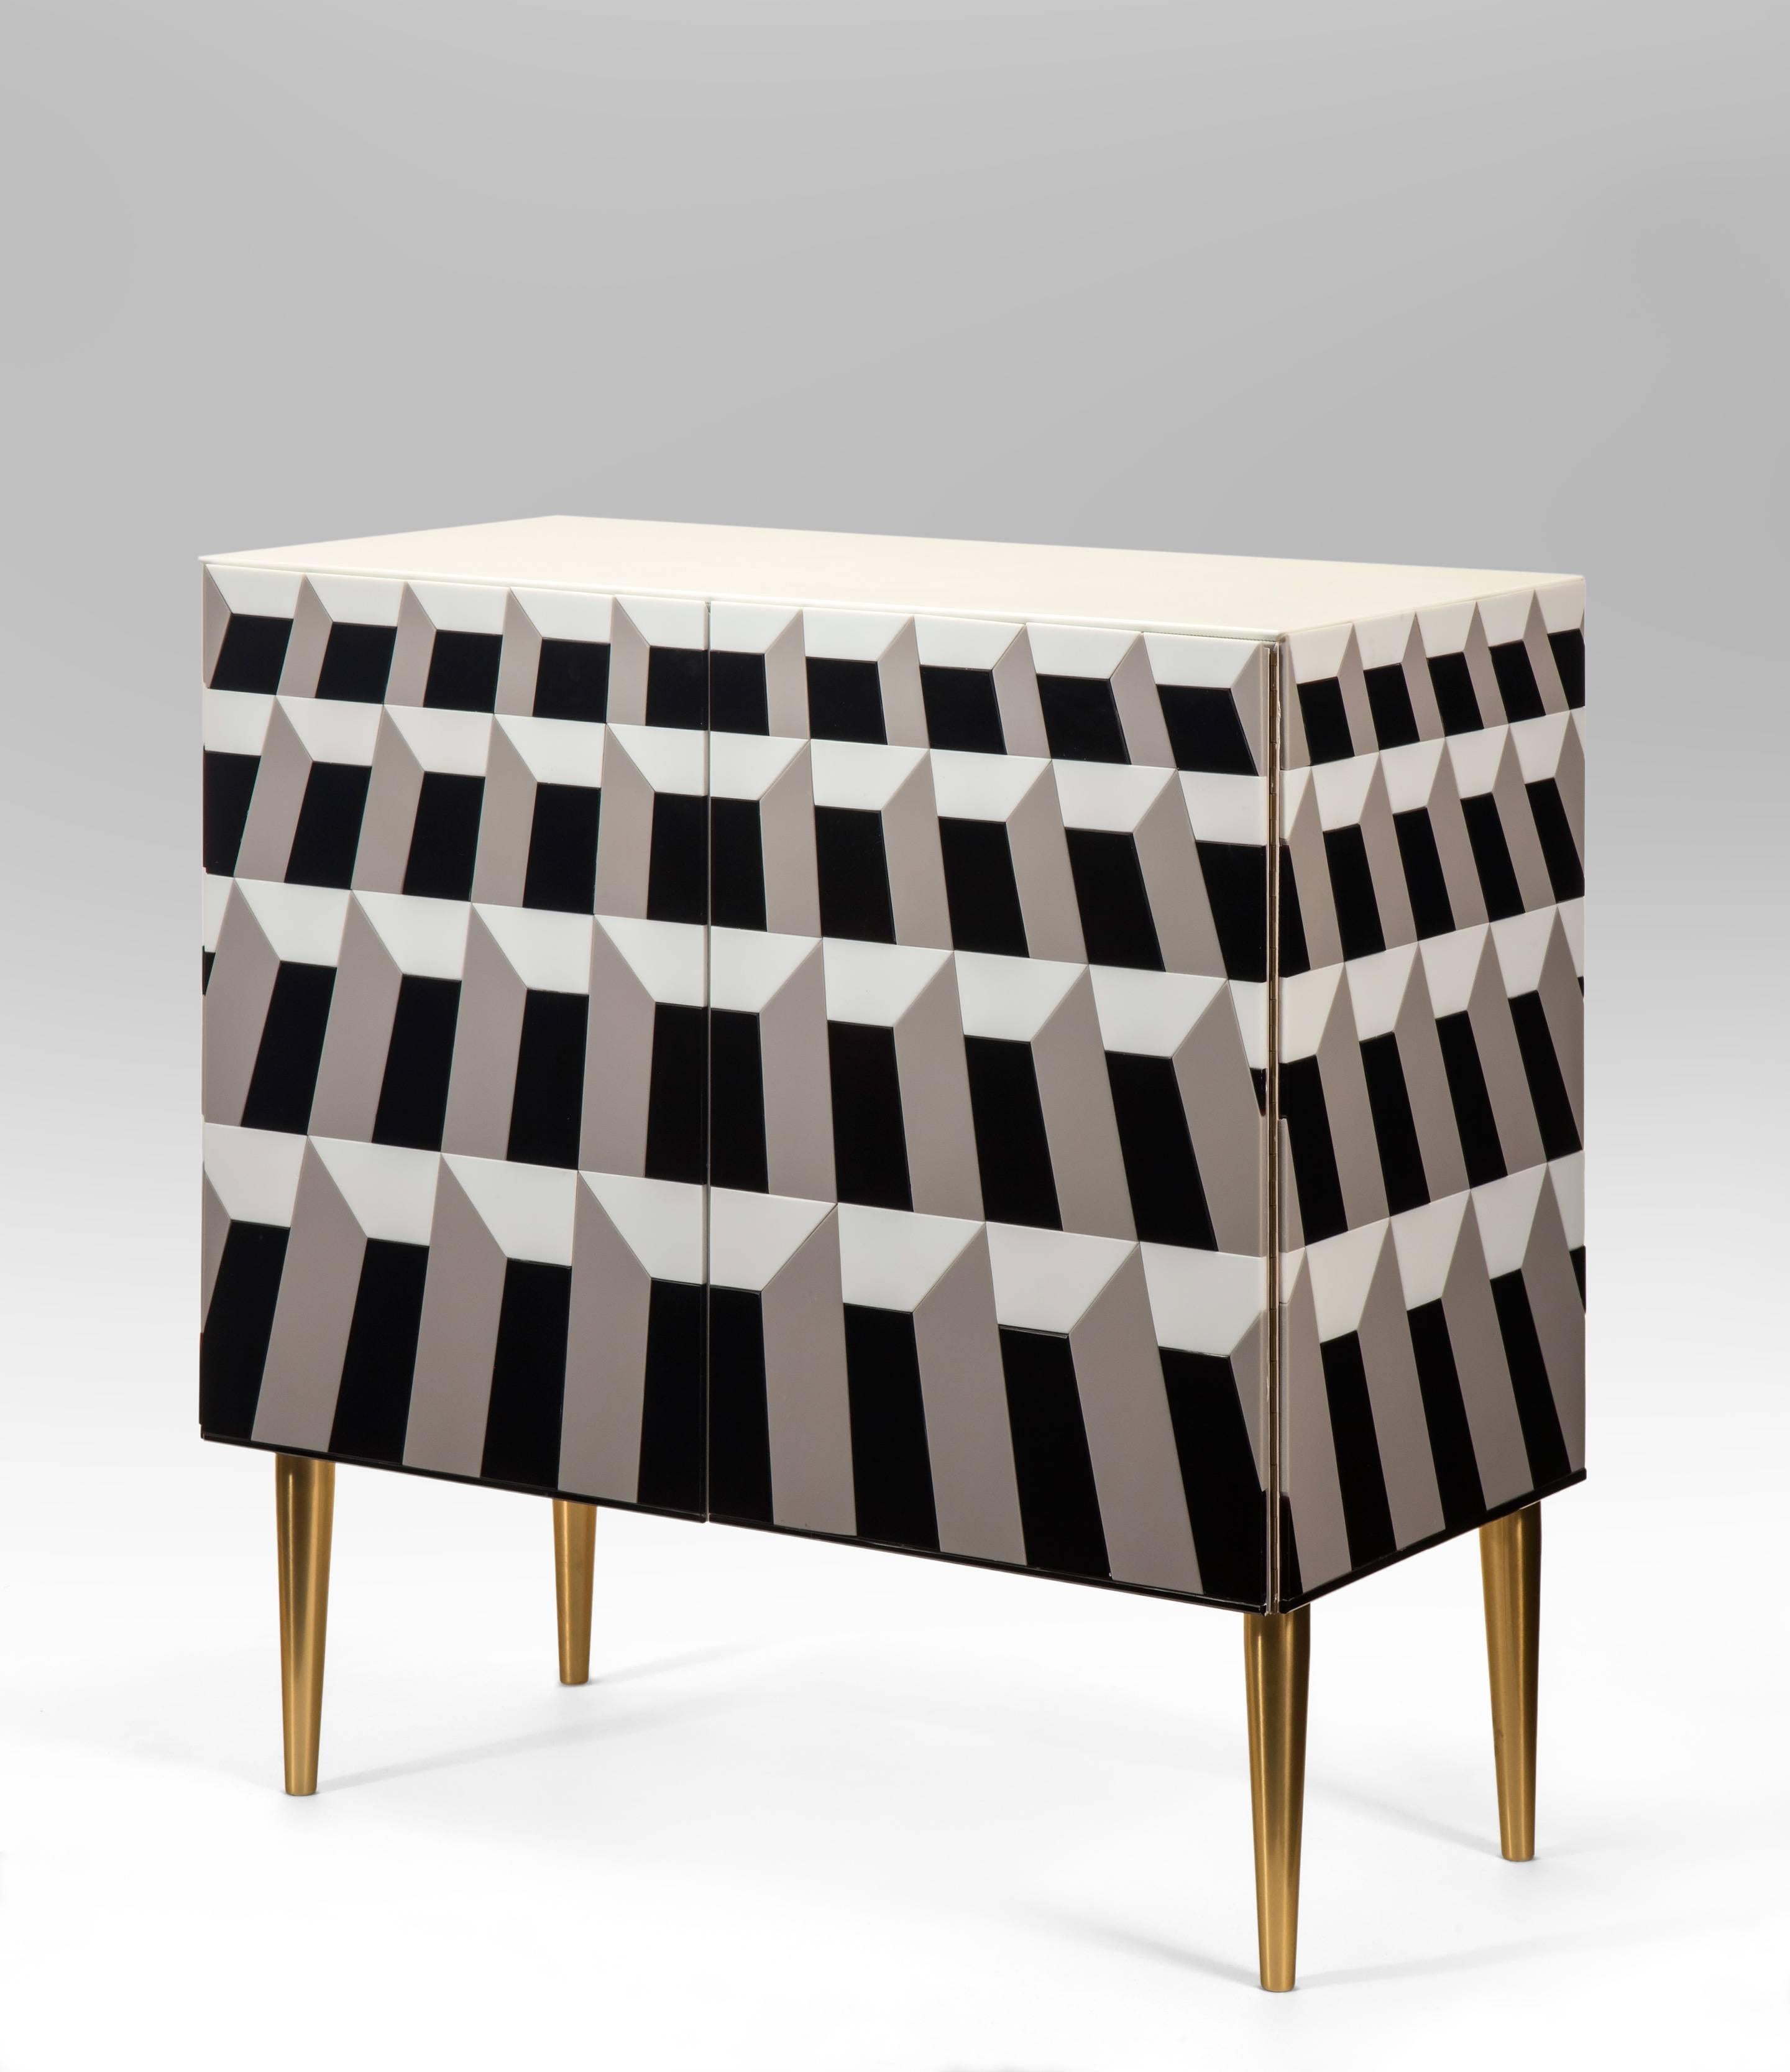 A stunning limited edition made exclusively for HM Luther. The rectangular top above two doors, raised on brass feet, the cabinet composed of vintage white, gray and black opaline glass in a geometric trompe l'oeil design. Signed: R.G.RIDA.